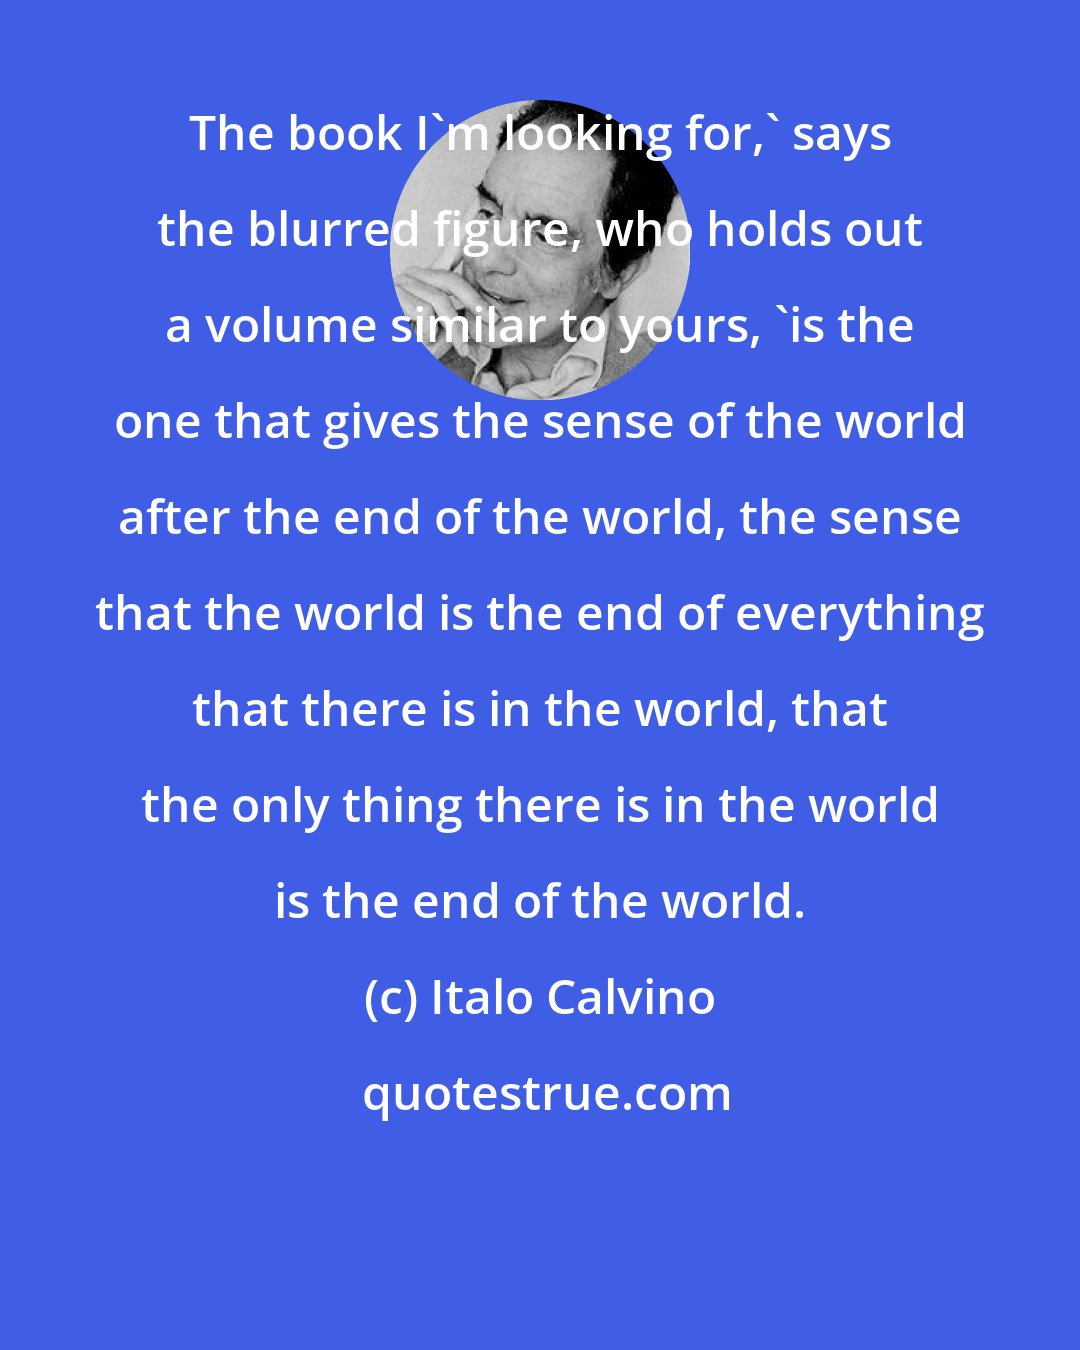 Italo Calvino: The book I'm looking for,' says the blurred figure, who holds out a volume similar to yours, 'is the one that gives the sense of the world after the end of the world, the sense that the world is the end of everything that there is in the world, that the only thing there is in the world is the end of the world.